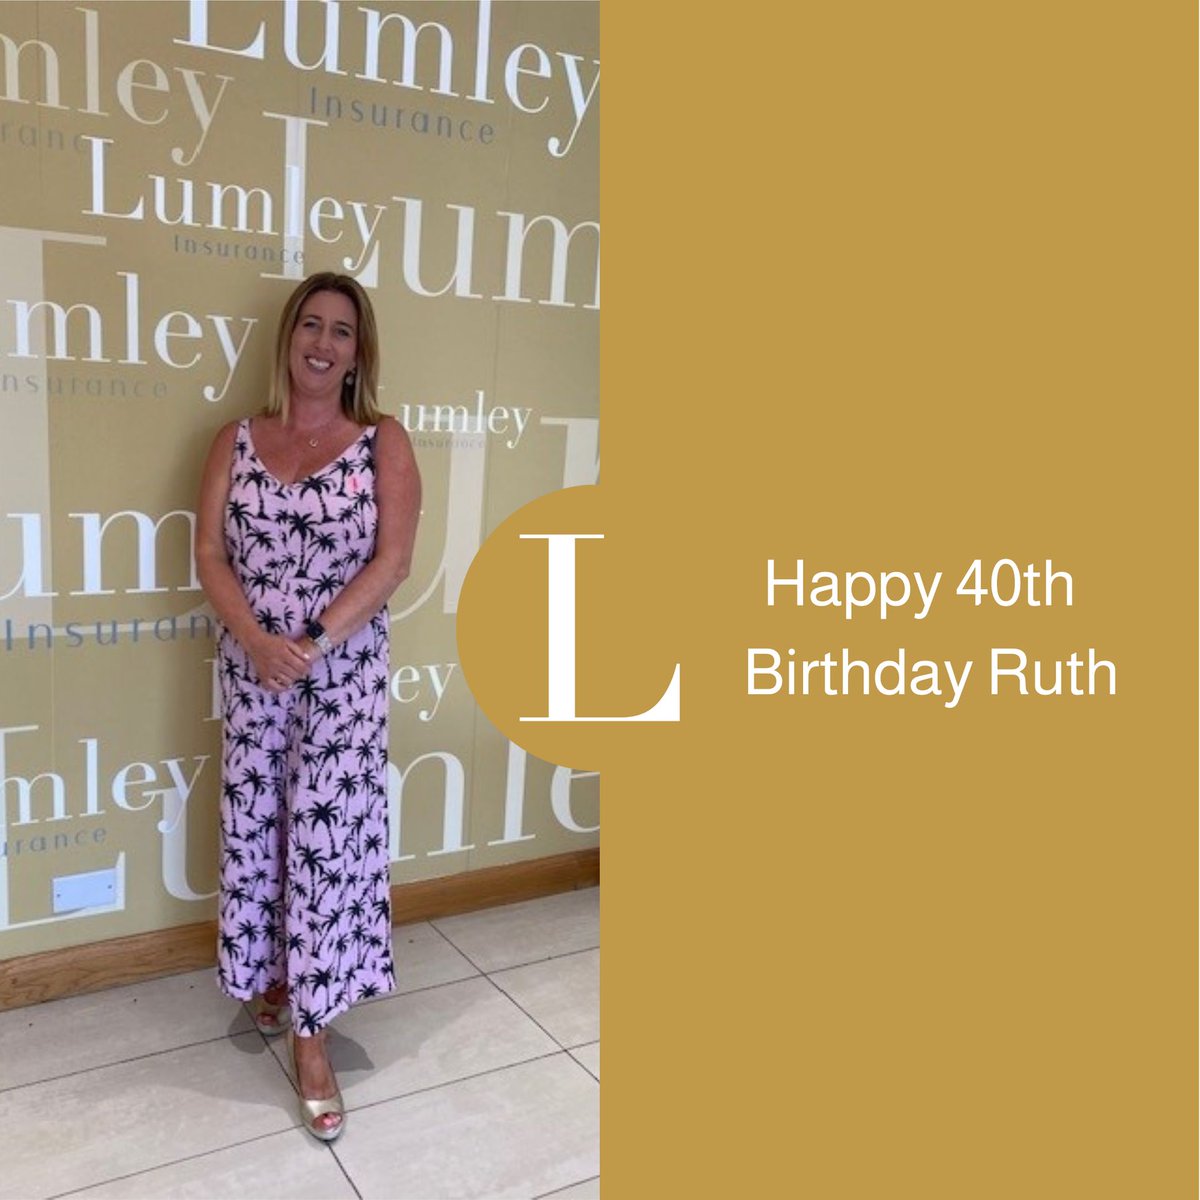 Please join us in wishing Ruth, our Client Account Handler, a very Happy 40th Birthday 🎉🎂